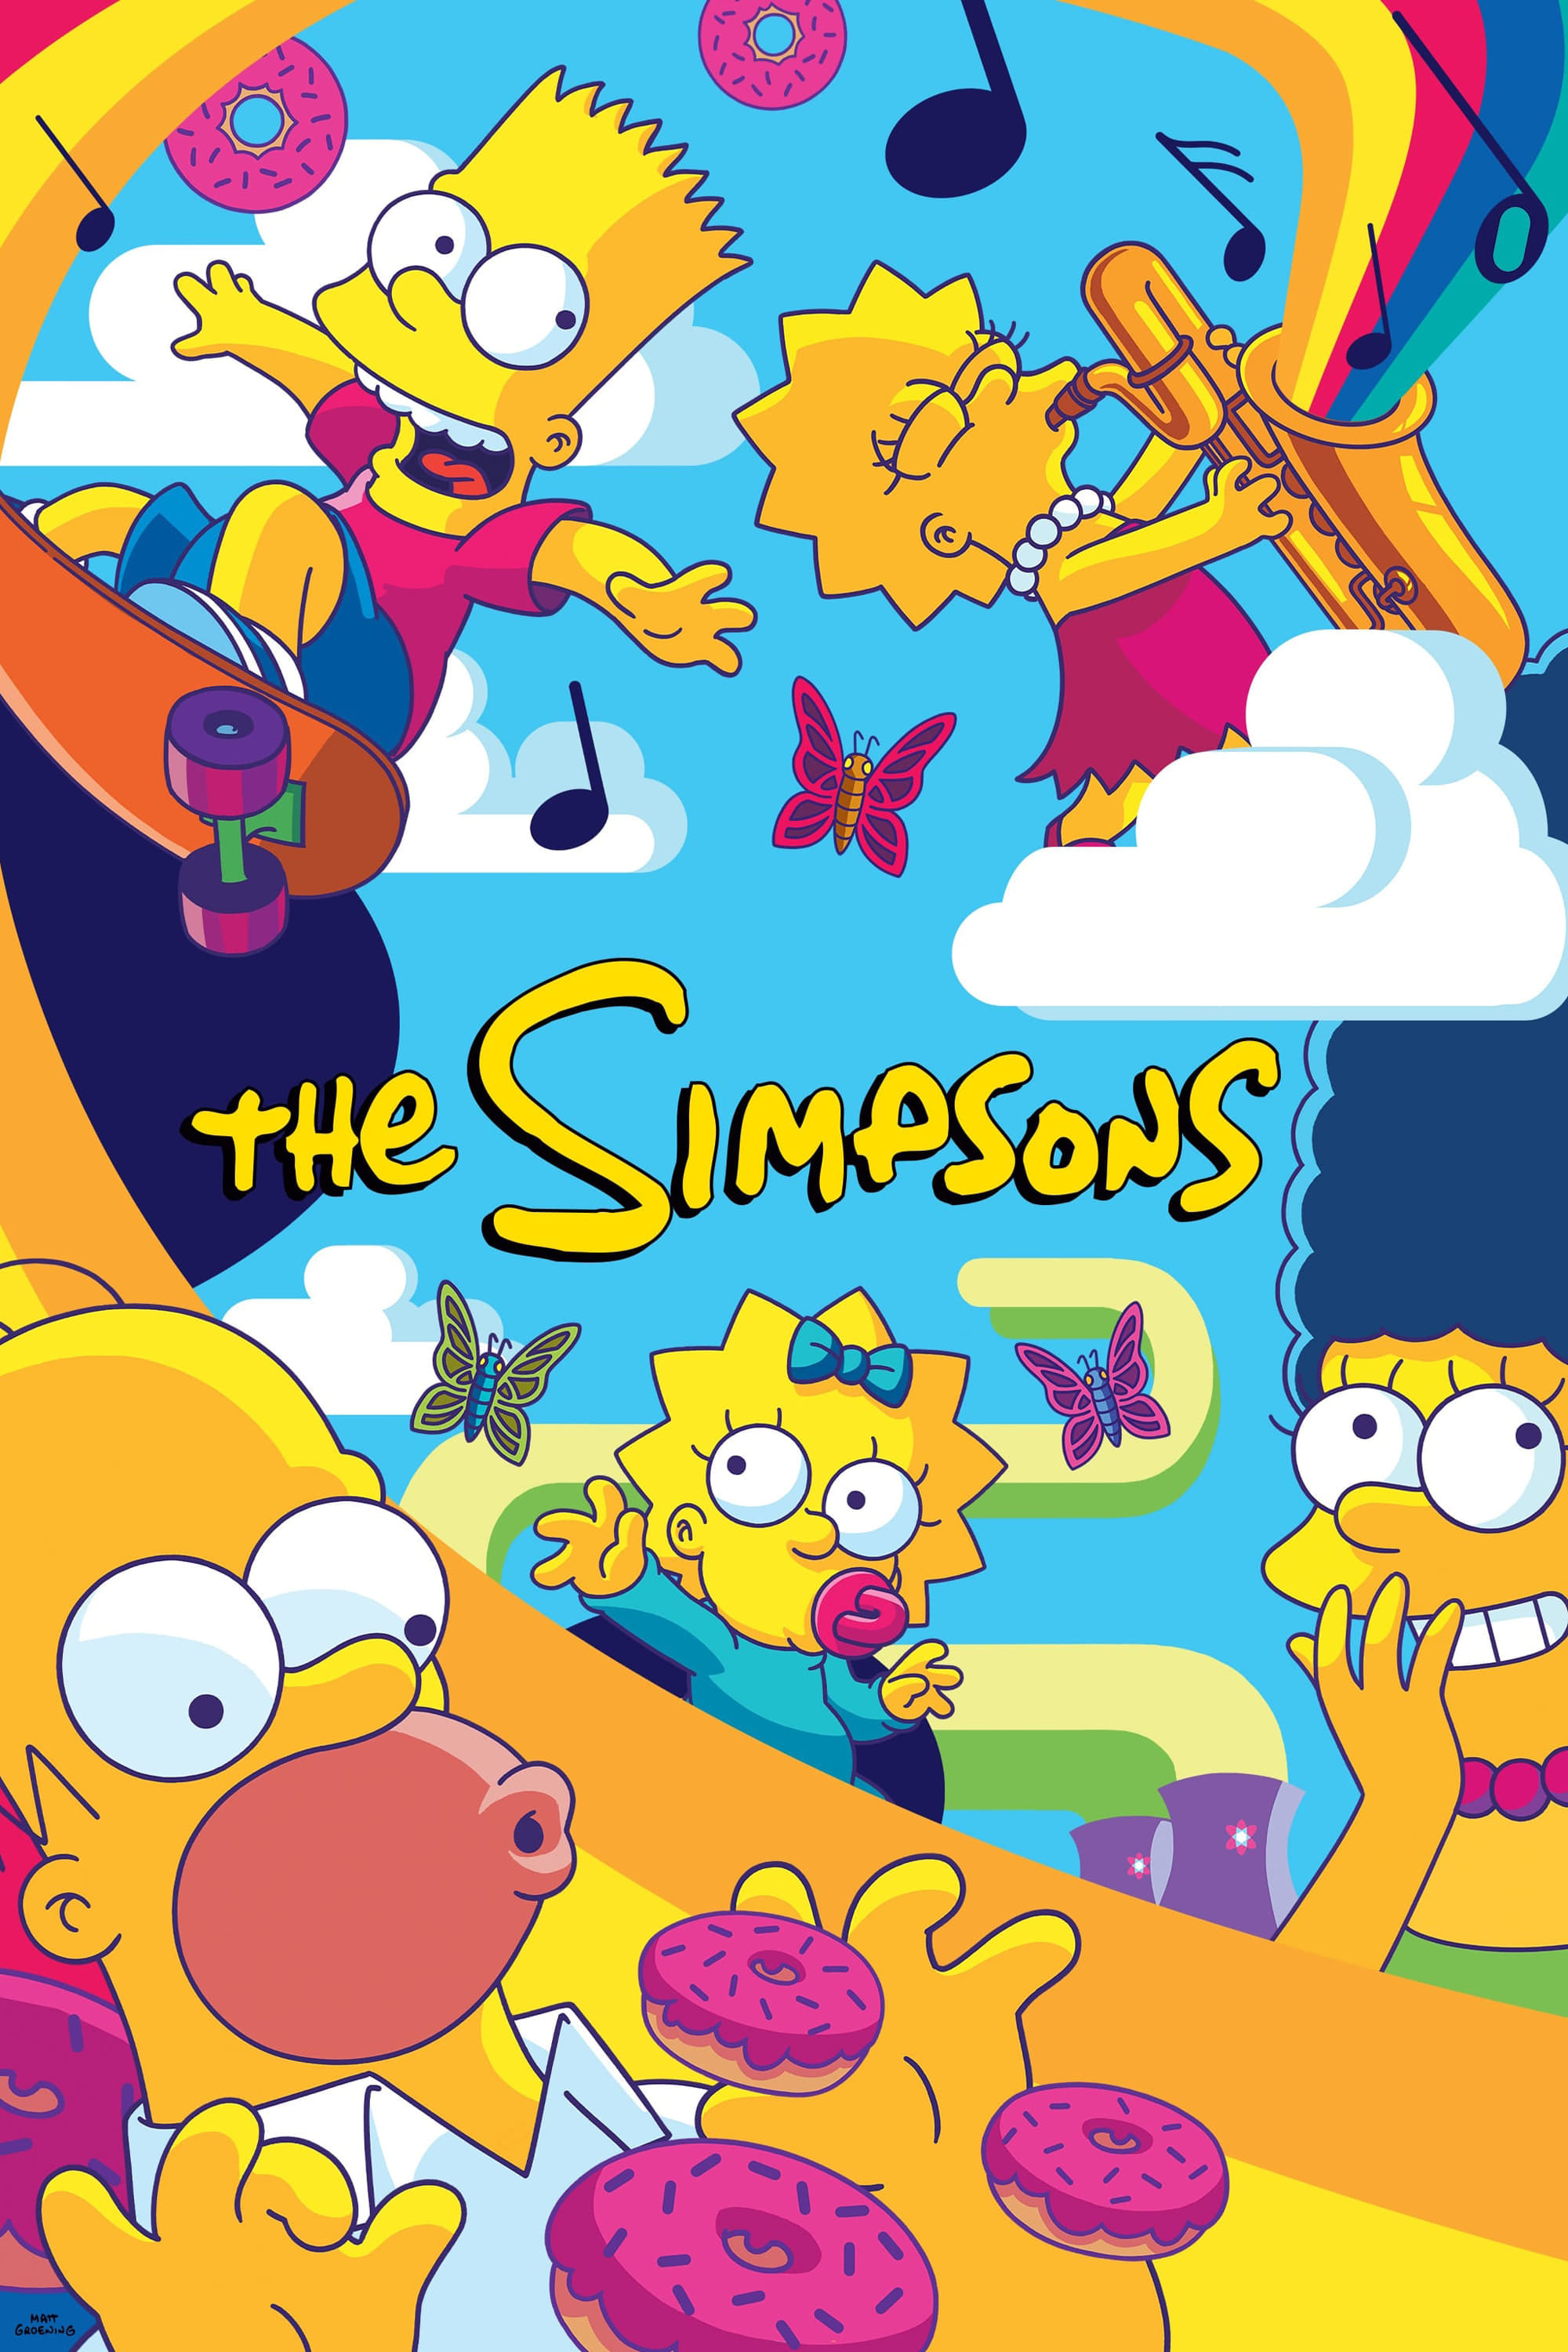 The Simpsons (S35E08) Download